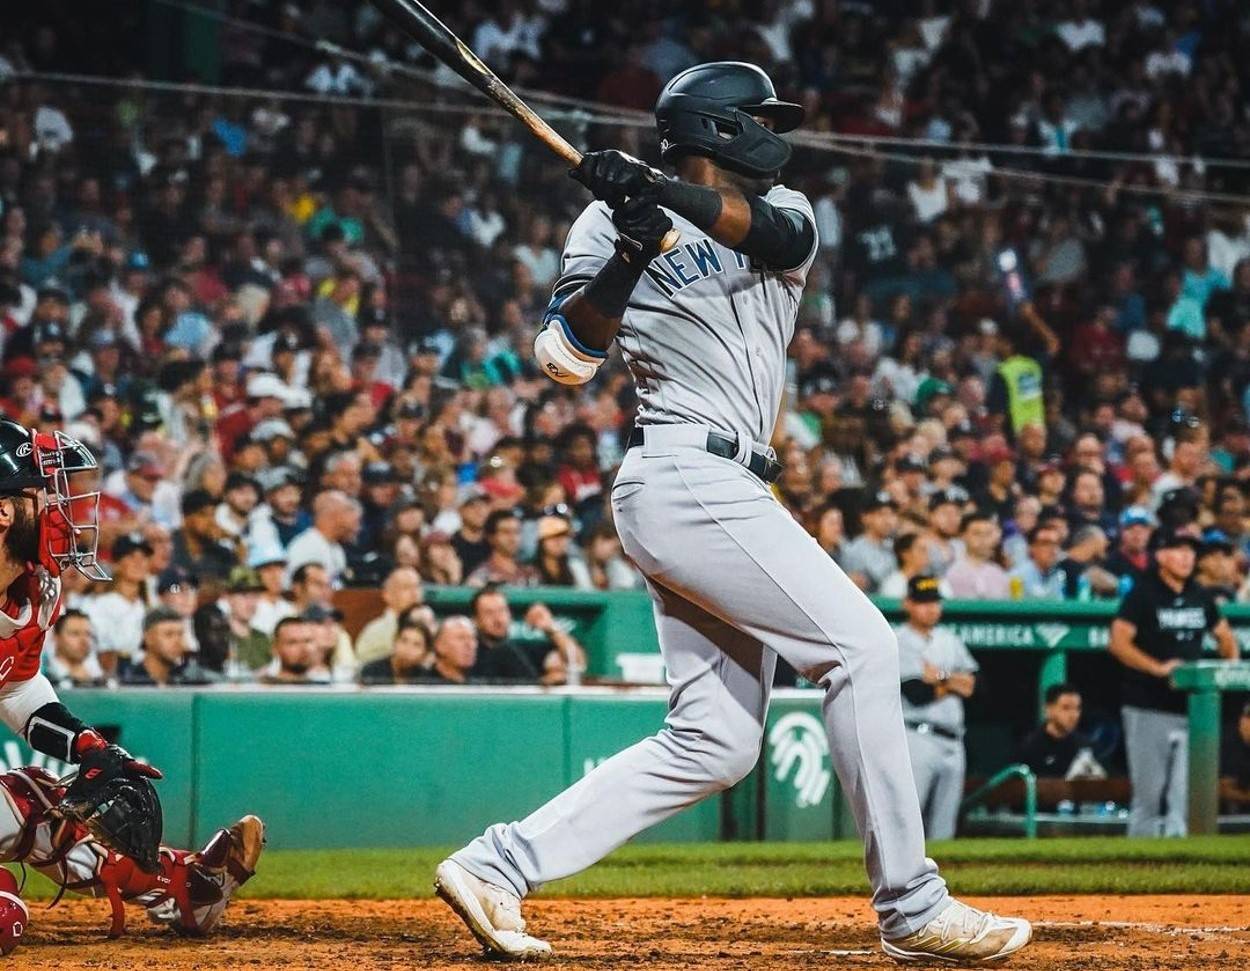 Estevan Florial is in action during the Yankees vs. Pirates game in PNC Park on September 15, 2023.